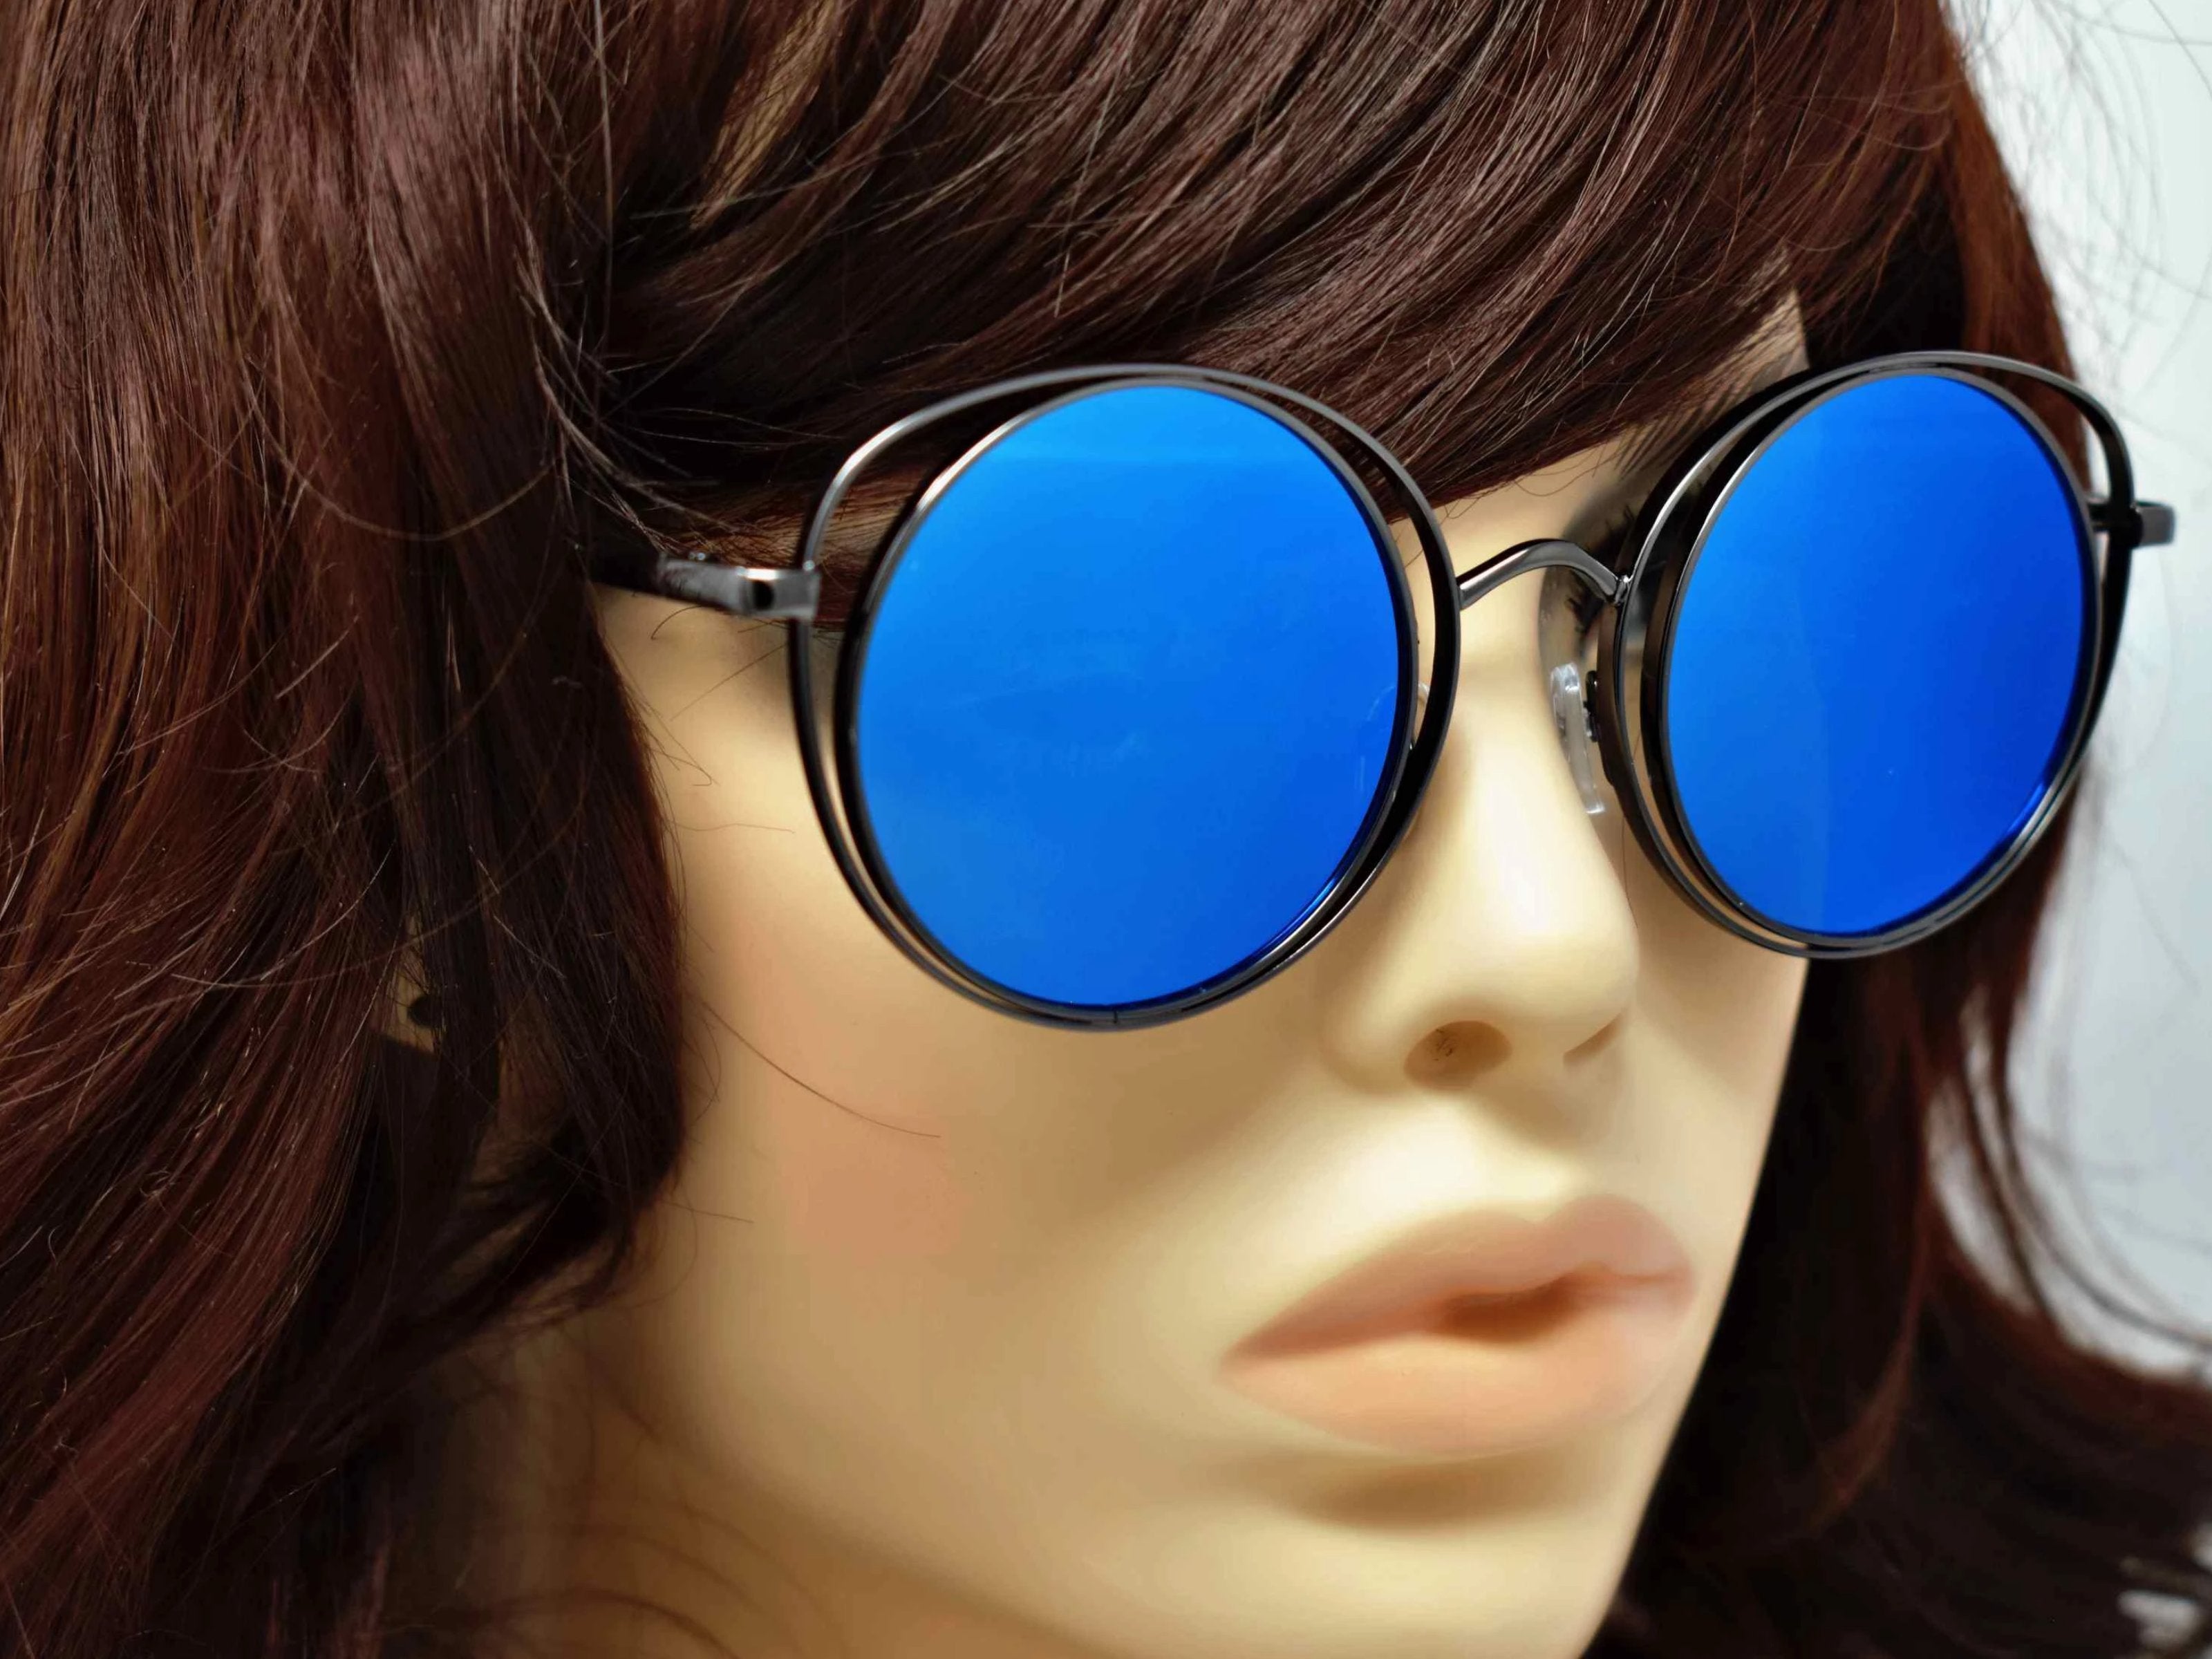 Get ready to have all the attention centered on you with our round shaped Aster Black framed blue mirrored lens sunglasses.